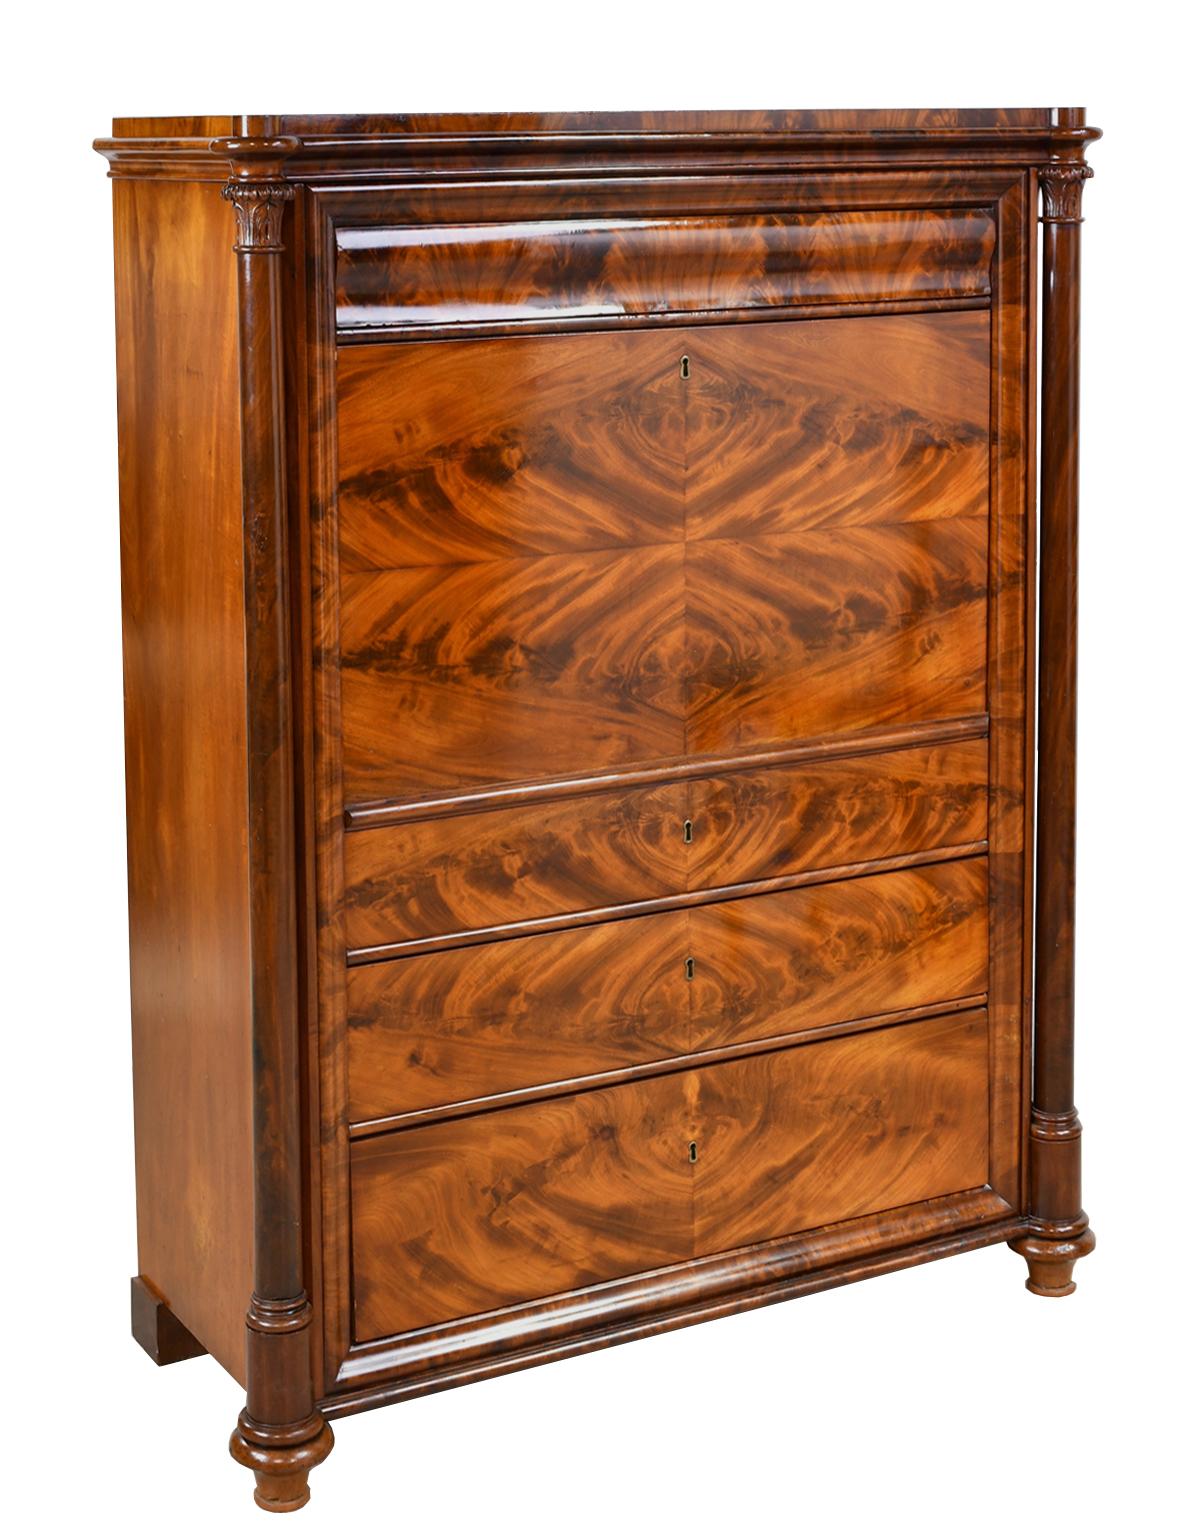 A very beautiful and finely-crafted secretary in West Indies mahogany with book-matched crotch mahogany along the entire front. There are three graduated storage drawers below the fall-front, and one above which opens with a secret button. The desk